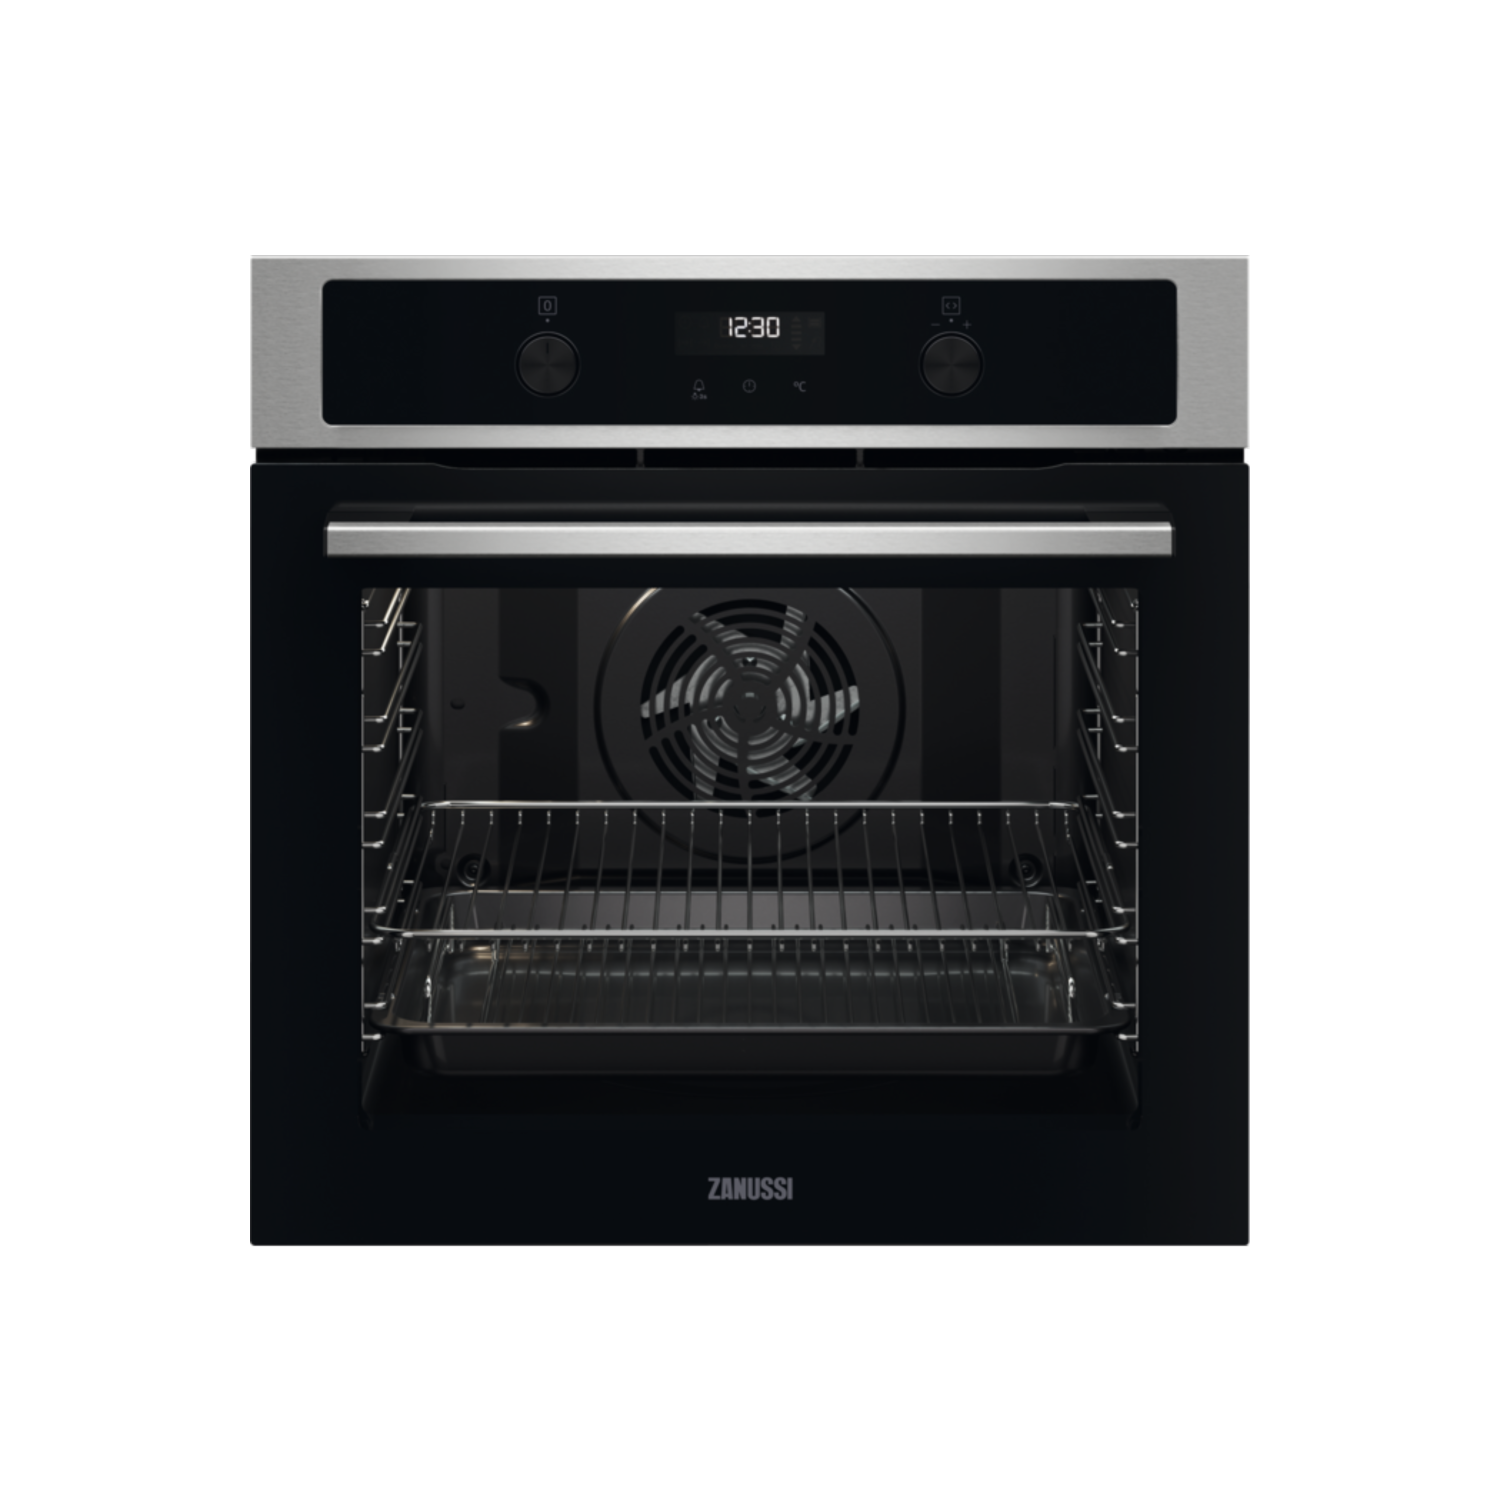 Refurbished Zanussi Series 60 ZOPND7X1 60cm Single Built In Electric Oven Stainless Steel